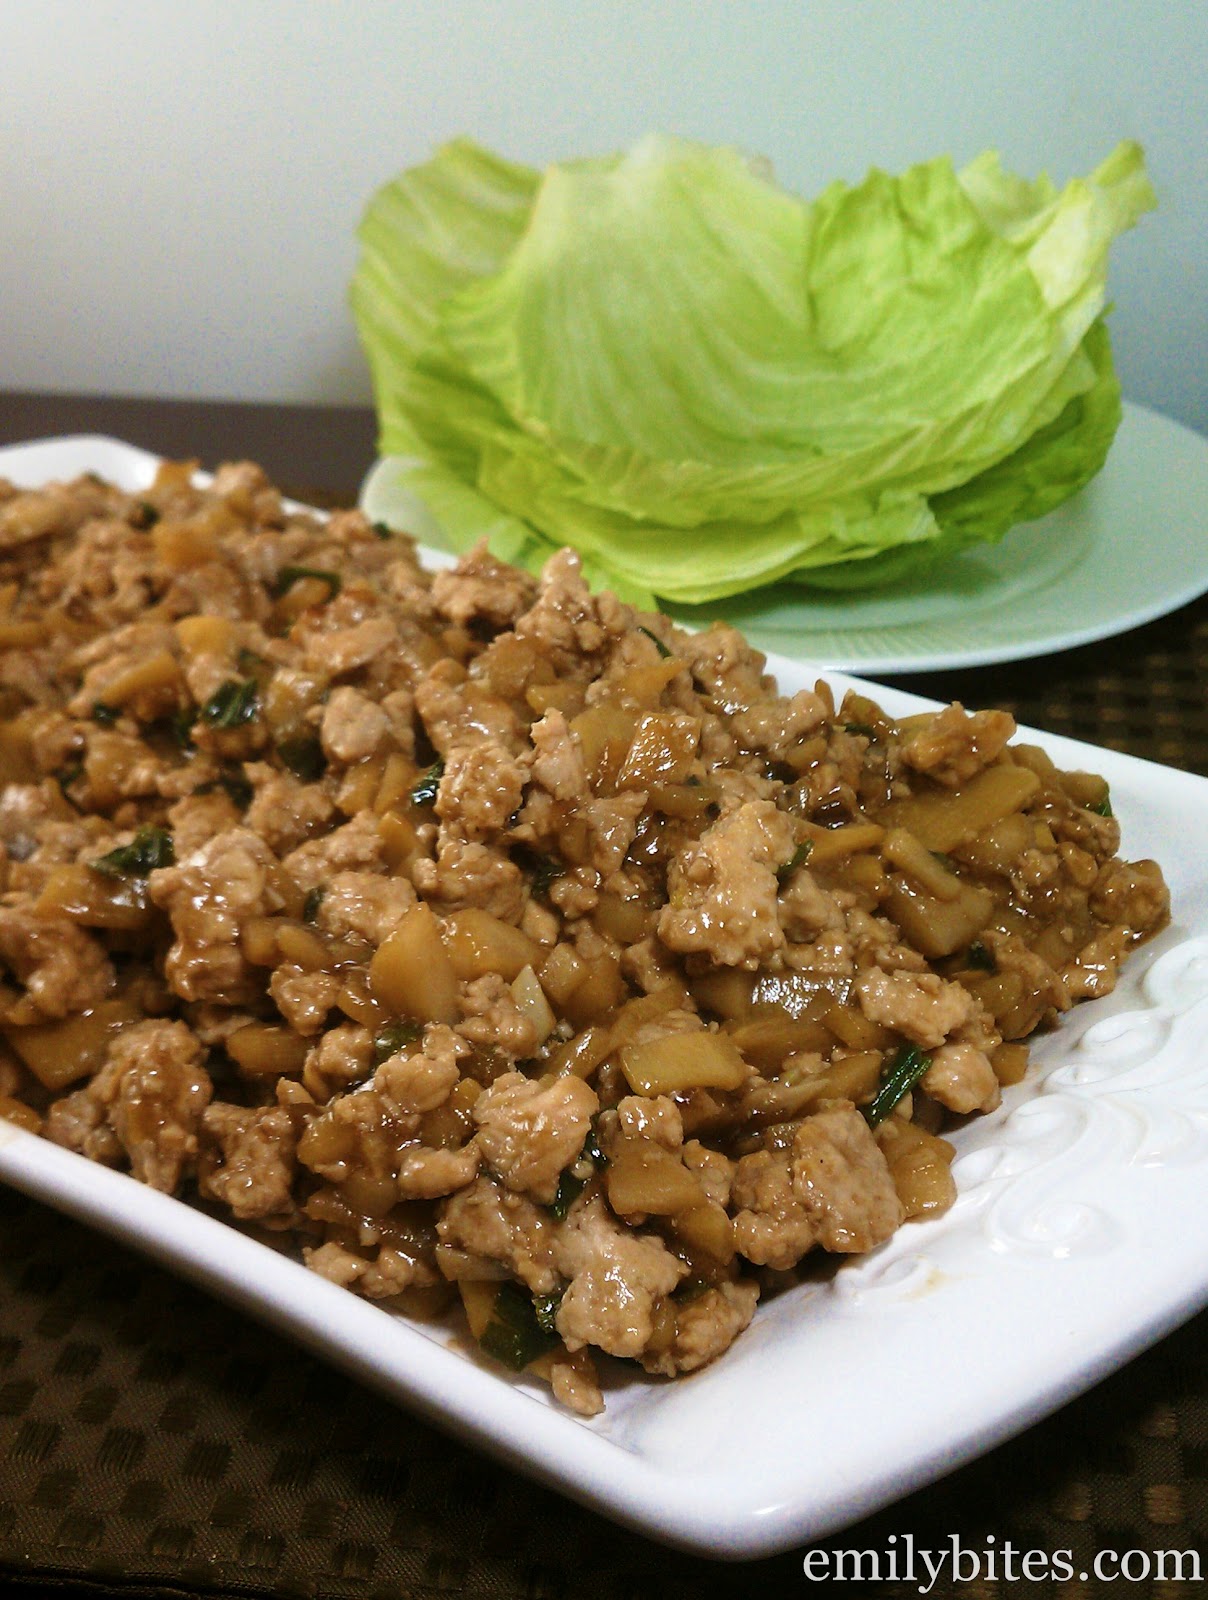 Pan Asian Chicken And Vegetable Lettuce Wraps